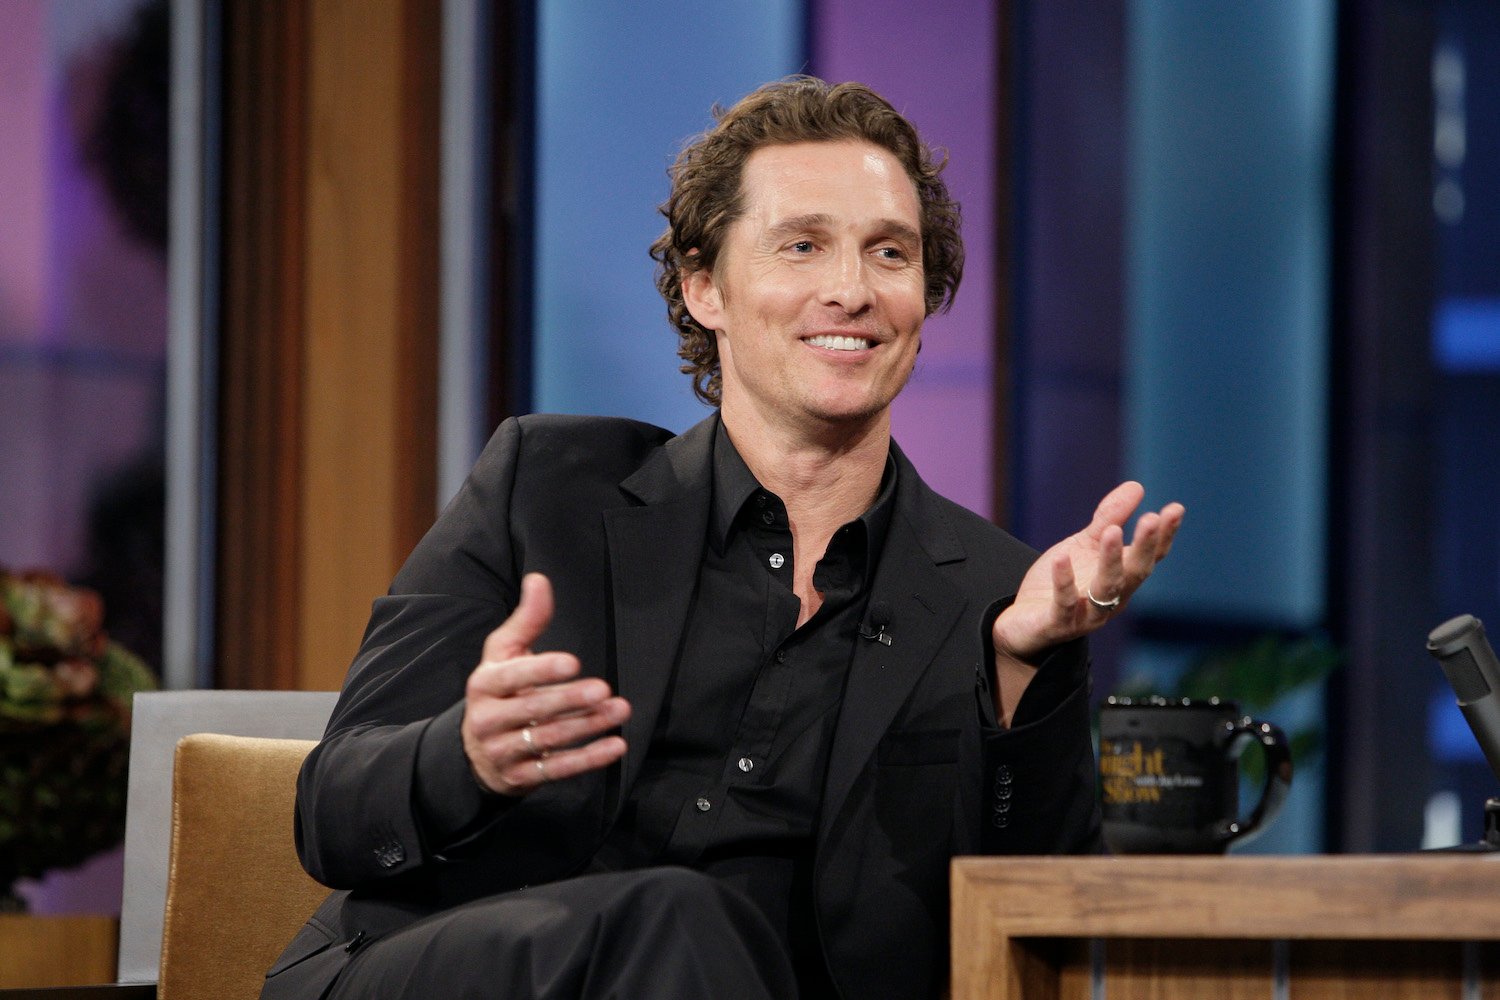 Matthew McConaughey during an interview on The Tonight Show With Jay Leno 2010